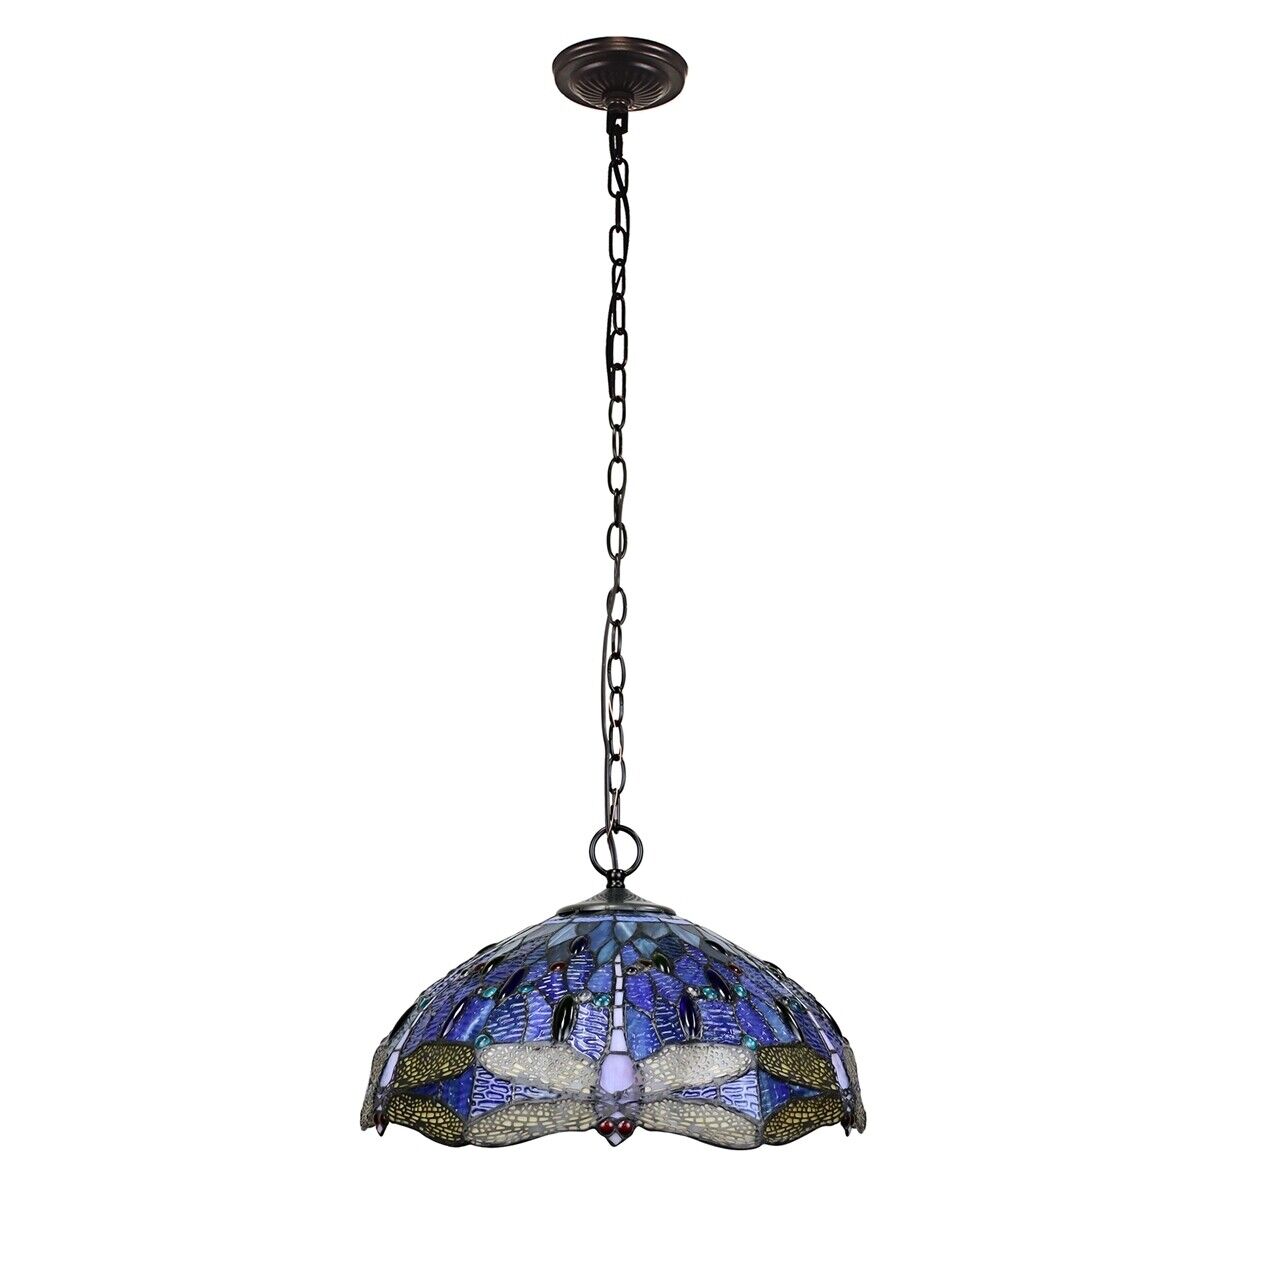 18" Stained Glass Blue Dragonfly Pendant Swag Ceiling Light